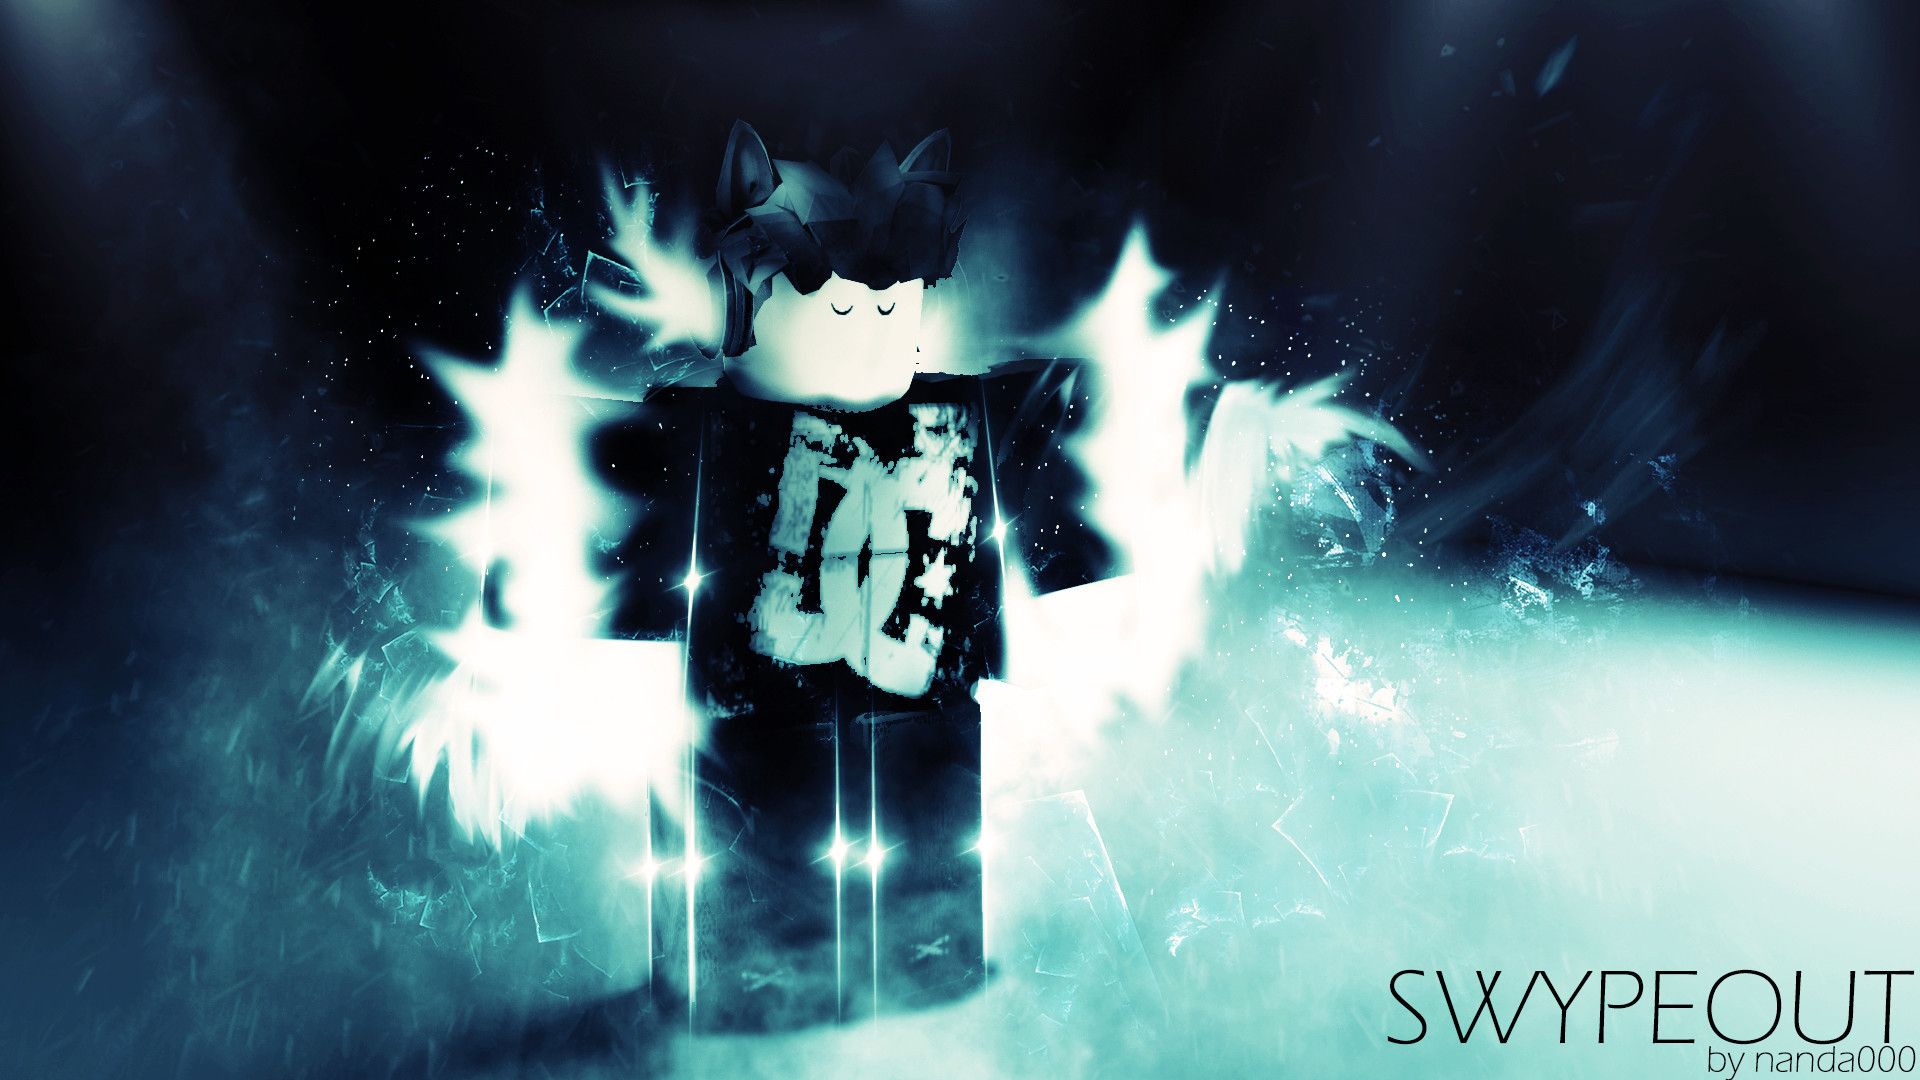 Roblox Wallpapers on X: #Roblox #Wallpaper  / X